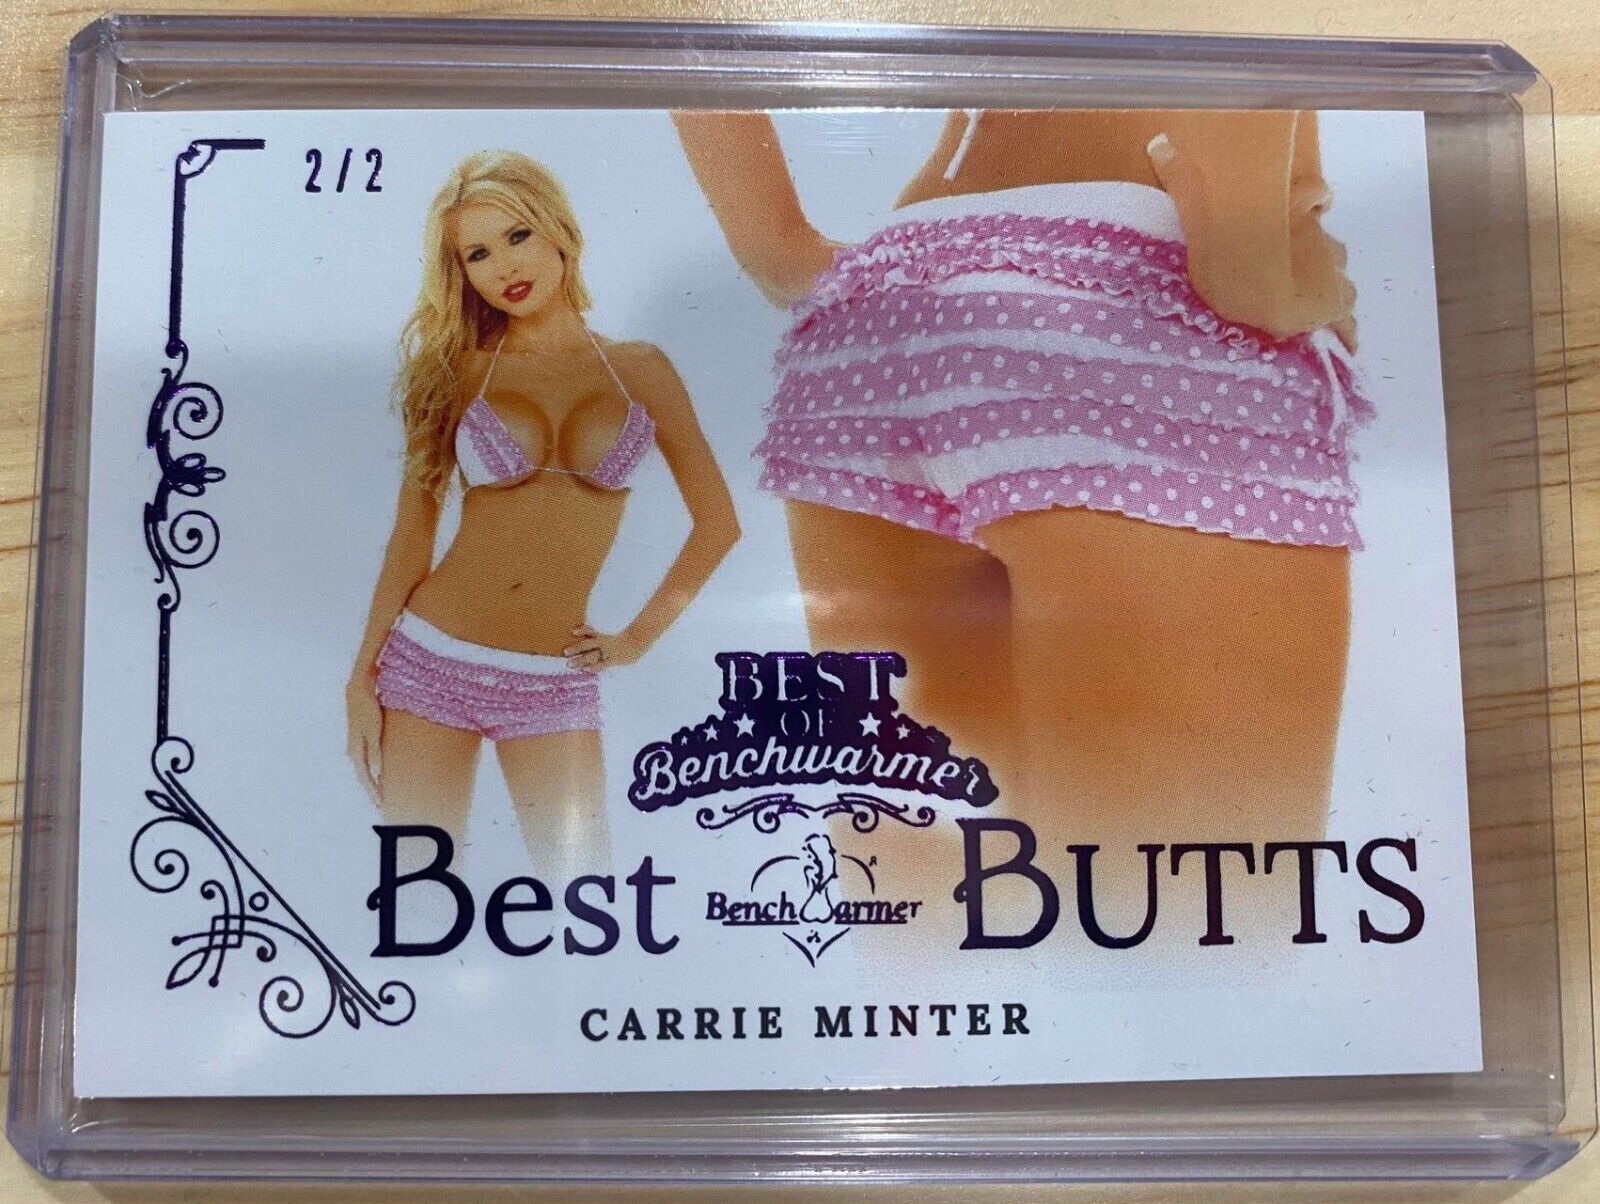 2022 Benchwarmers Best of Bench Warmer Best Butts Purple Carrie Minter 2/2